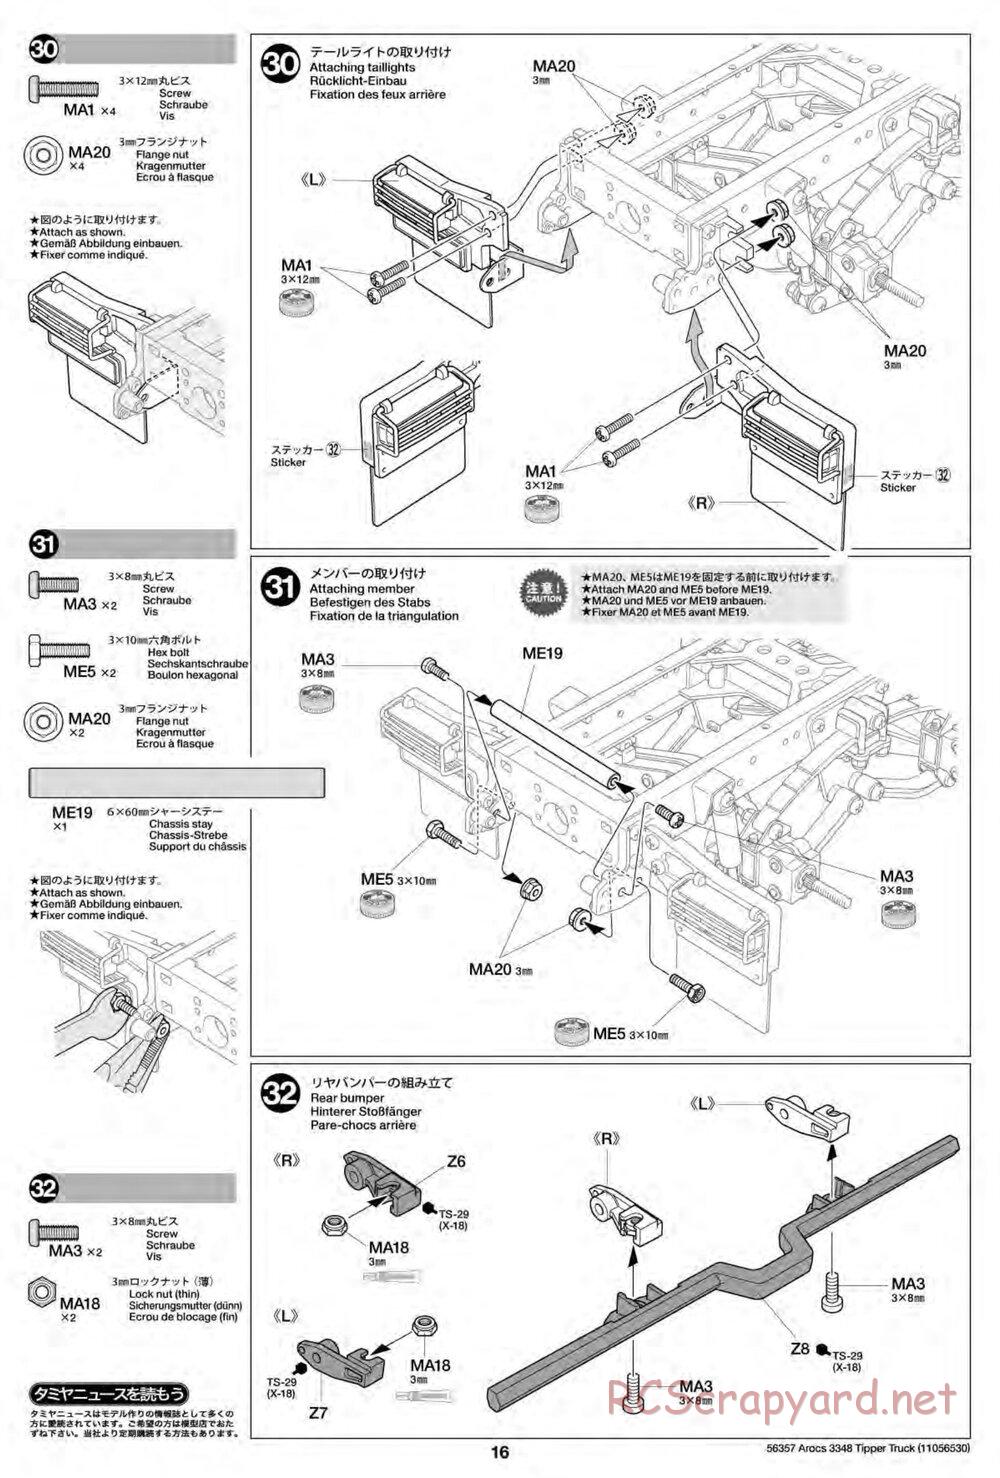 Tamiya - Mercedes-Benz Arocs 3348 6x4 Tipper Truck Chassis - Manual - Page 16